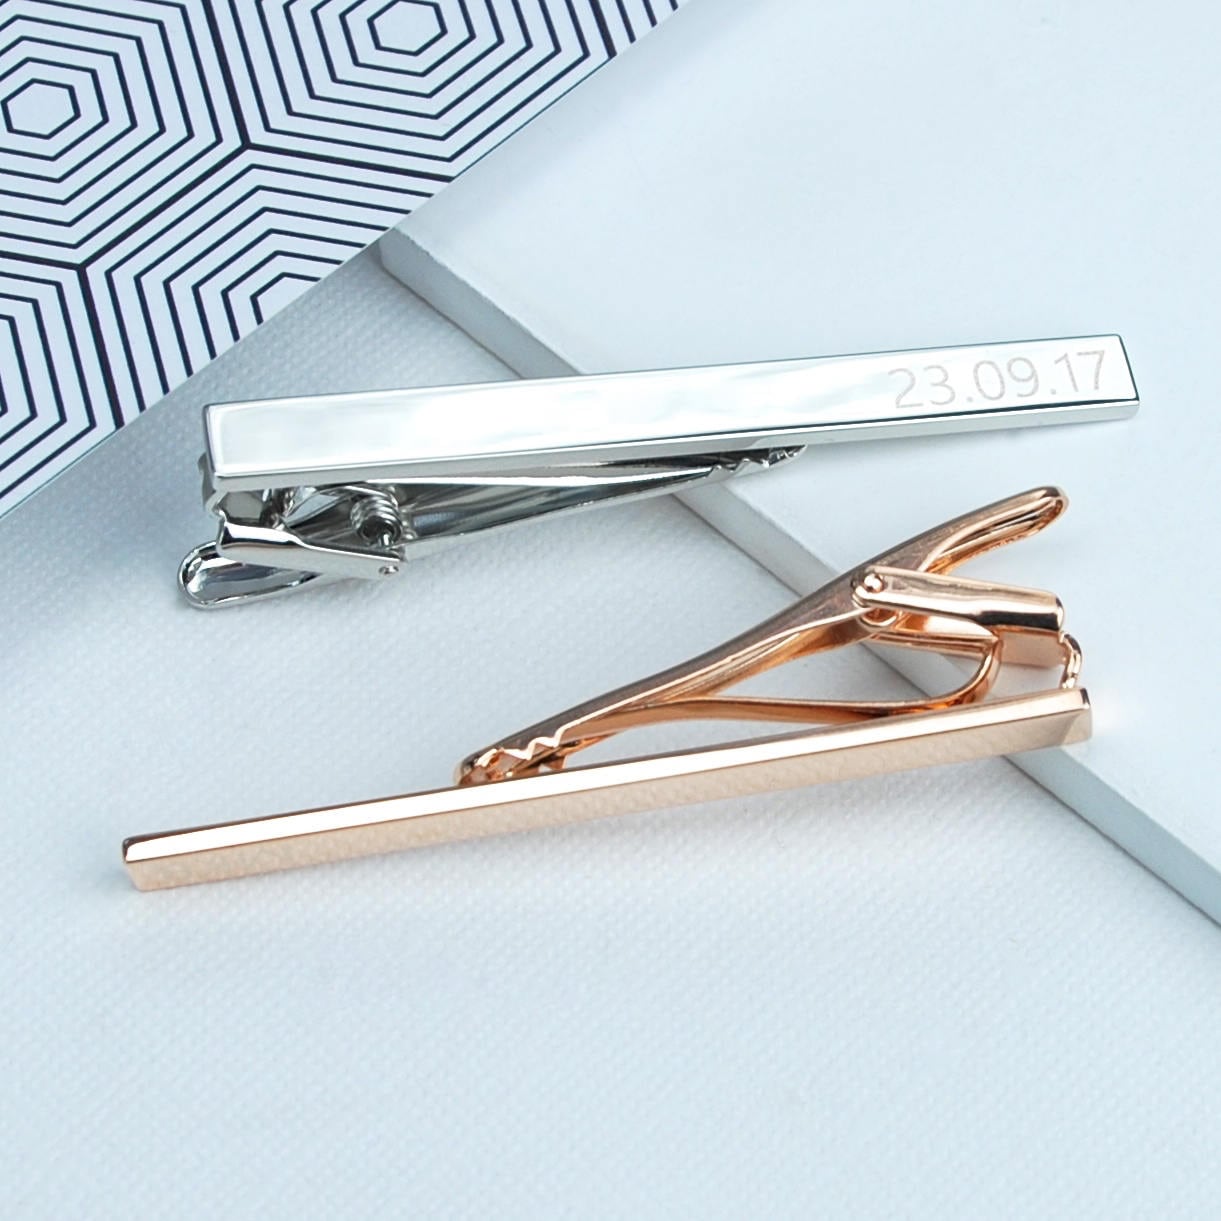 Men’s Tie Clips Clasps Simple Bar Holder Wedding Party Ornament Gift Present